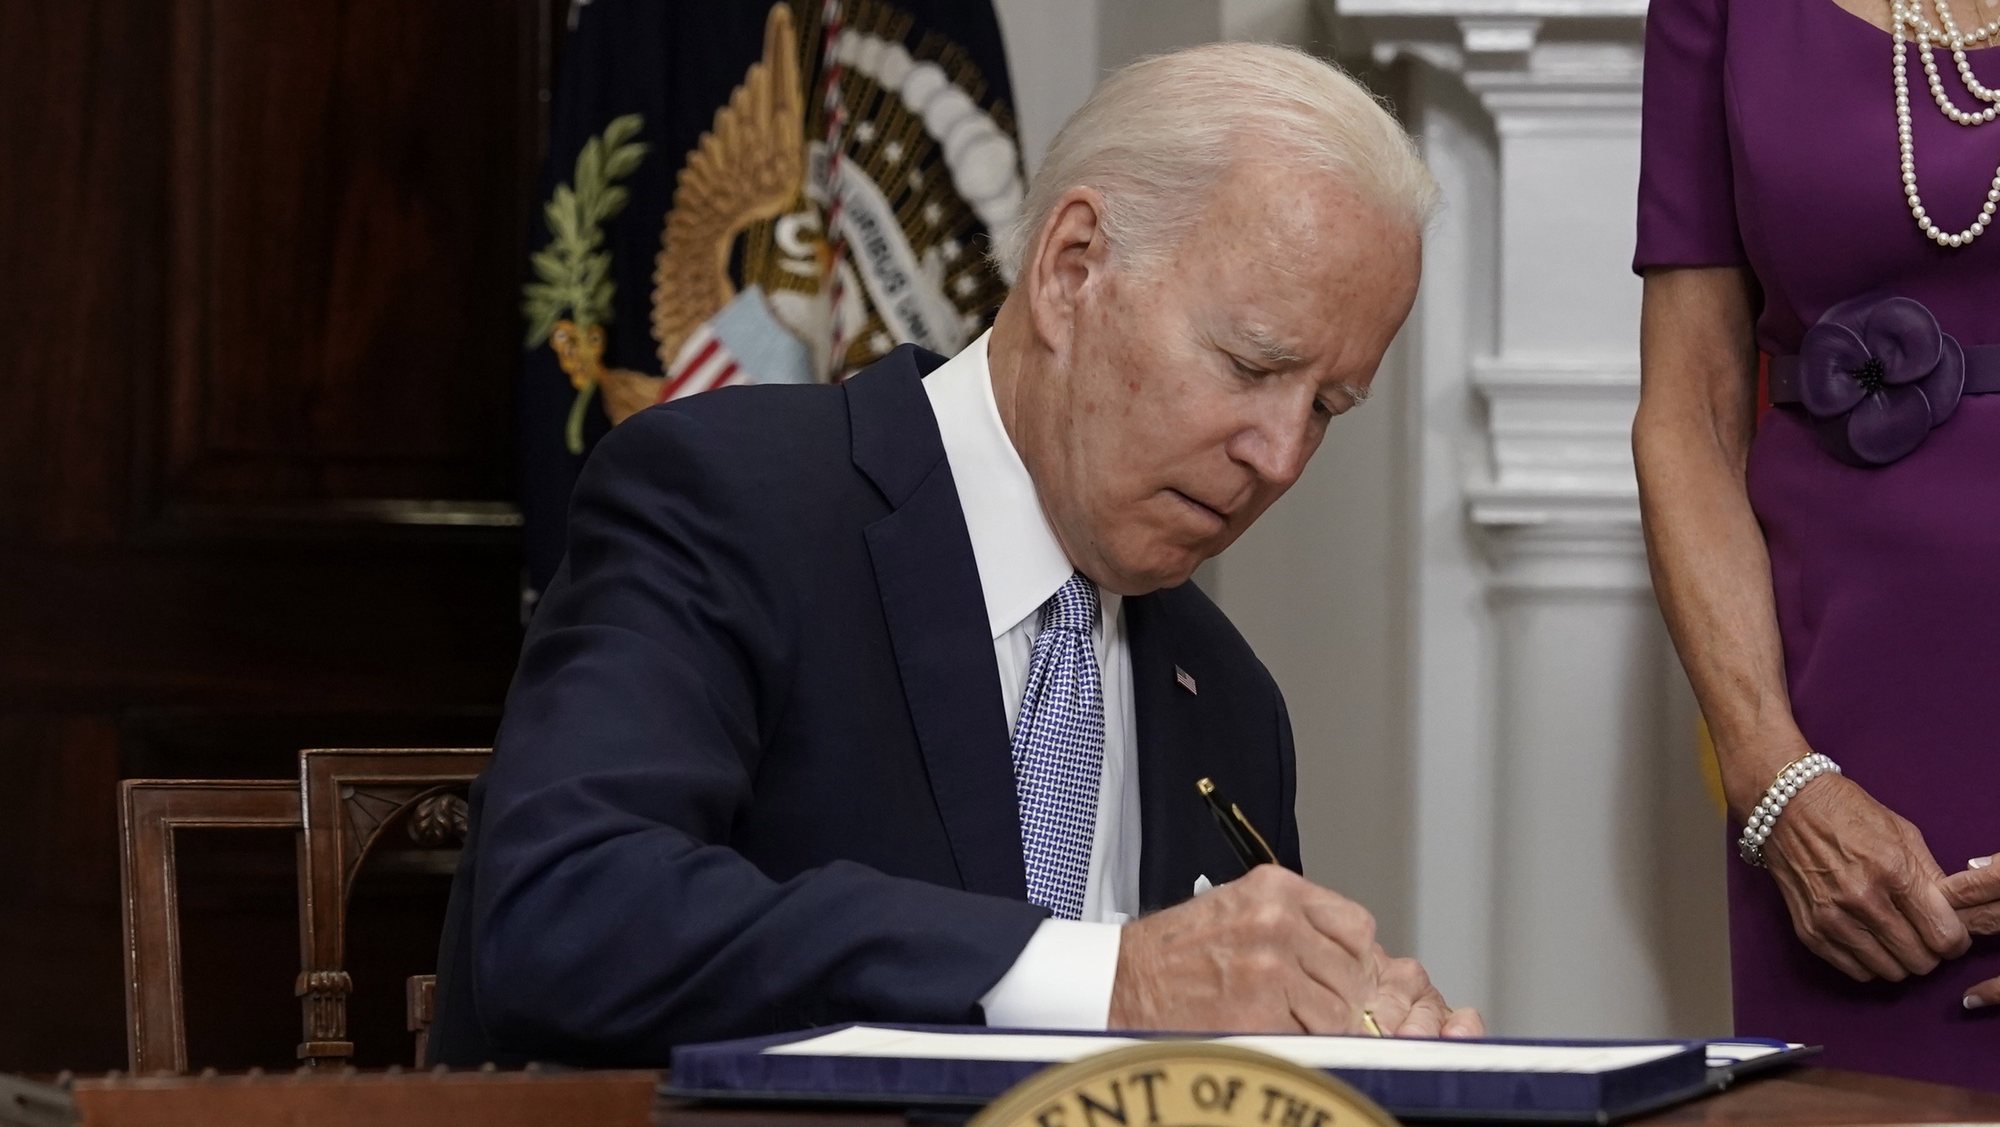 epa10033367 US President Joe Biden signs into law S. 2938, the Bipartisan Safer Communities Act, in the Roosevelt Room at the White House in Washington, DC, USA, 25 June 2022.  EPA/Yuri Gripas / POOL